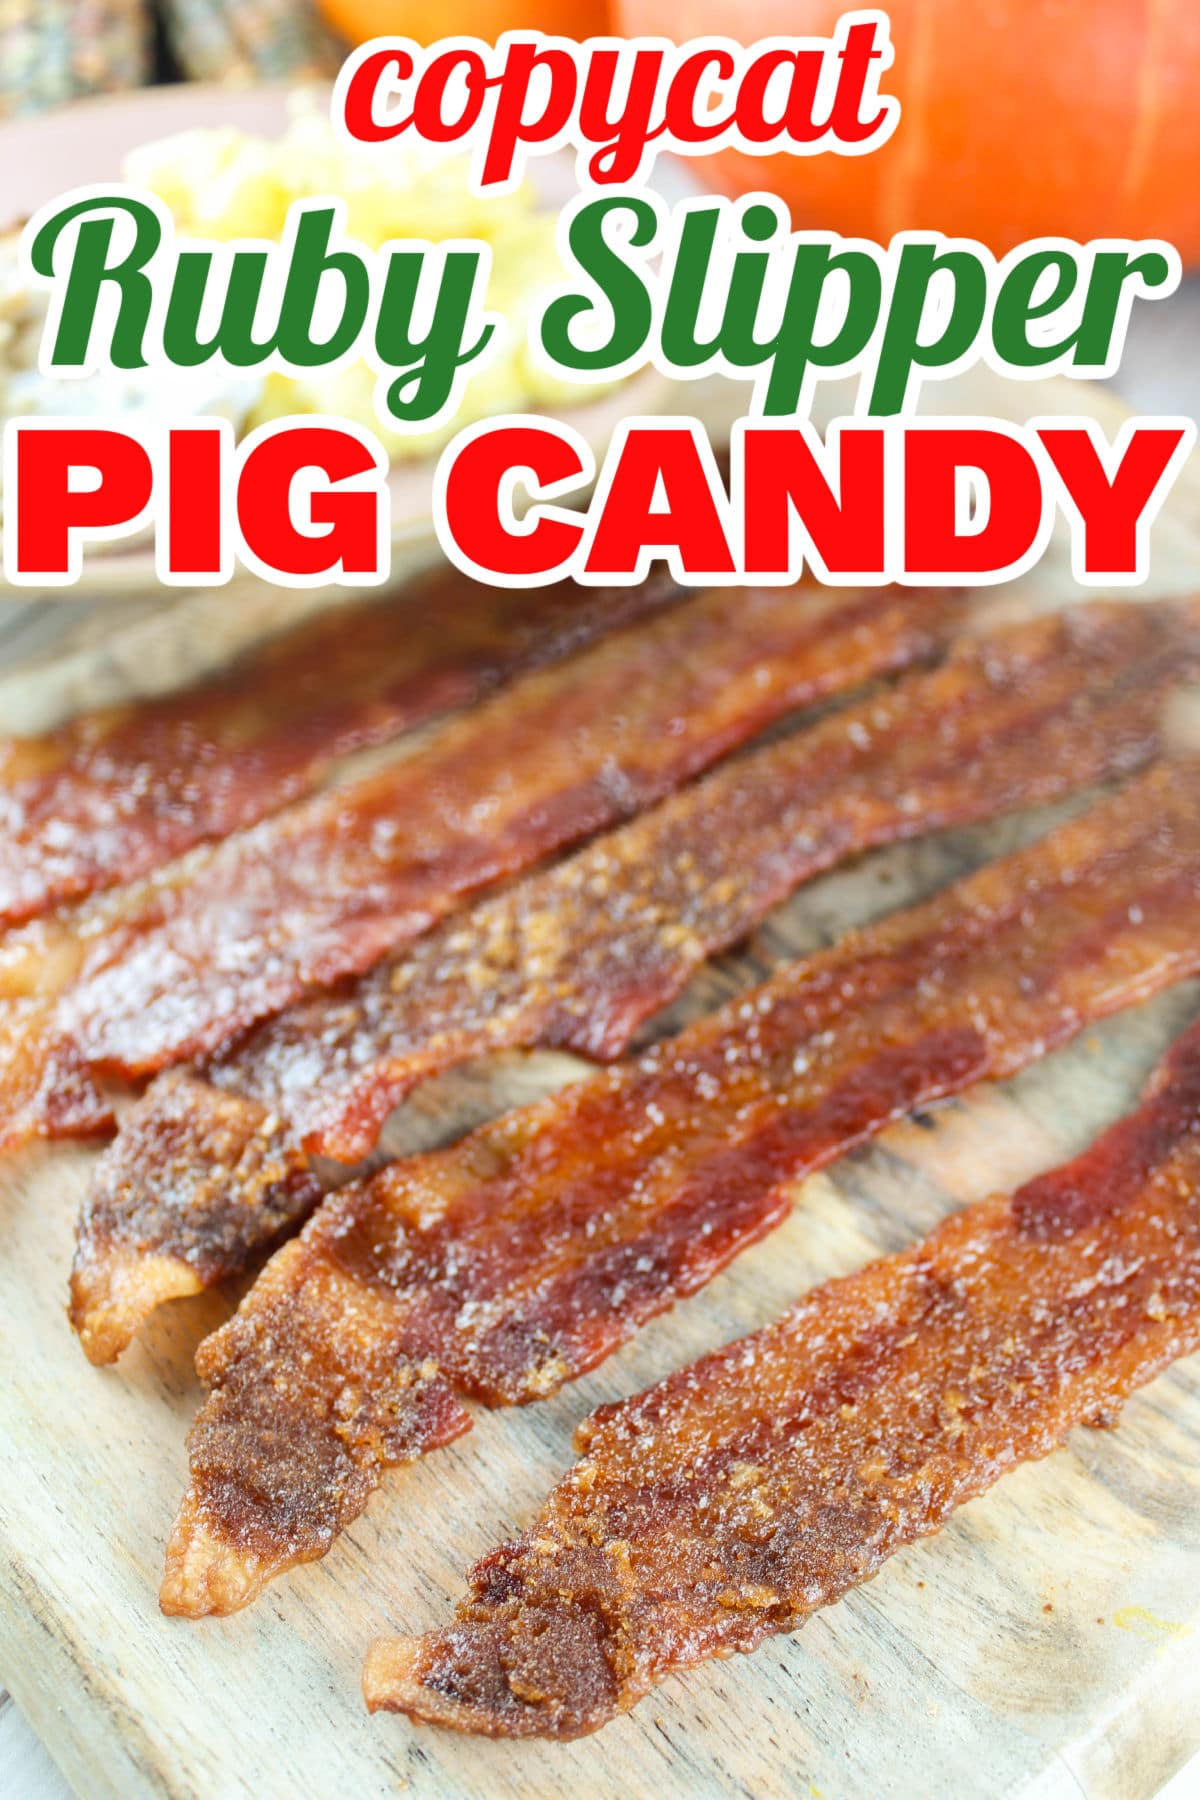 This Copycat Ruby Slipper Pig Candy is heavenly!!! I mean - I didn't realize bacon could get better - but when you slather it with brown sugar - it does! Whenever I visit a Ruby Slipper - it is always the first thing I order - Diet Coke & Pig Candy please!!!  via @foodhussy